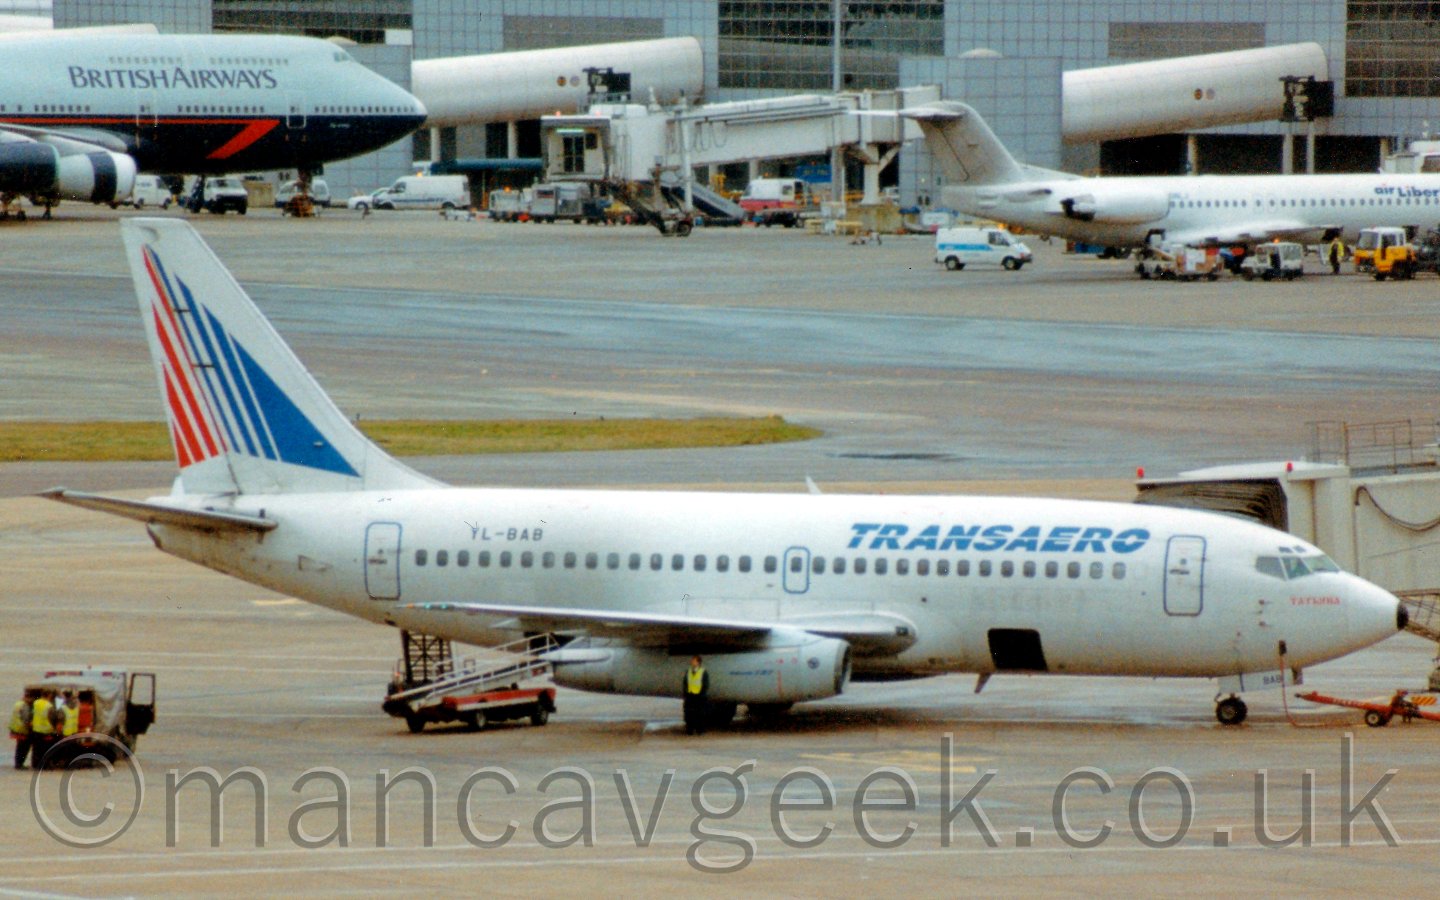 Side view of a twin engined jet airliner parked at it's gate, facing to the right, with a white airbridge attached to the forward door on the opposite side. The plane is mostly white, with blue "TRANSAERO" titles on the upper forward fuselage, and the registration "YL-BAB" on the upper rear fuselage. The tail has a large arrowhead design, pointing upwards, made up of vertical red and blue lines of varying widths. There are cargo bay doors open in the lower front and rear fuselagge, the one at the rear has an orange and white belt loader raised towards it. Some baggage handlers are clustered around a truck off to the left of the frame. There is a man wearing a yellow hoi-viz vest standing in front of one of the engines. In the background, a large grey terminal building fills the top of the frame, with several empty airbridges in the middle, and a plane attached to the ones on each side, a large 4 engined jet airliner in the top left, and a smaller twinjet on the upper right.